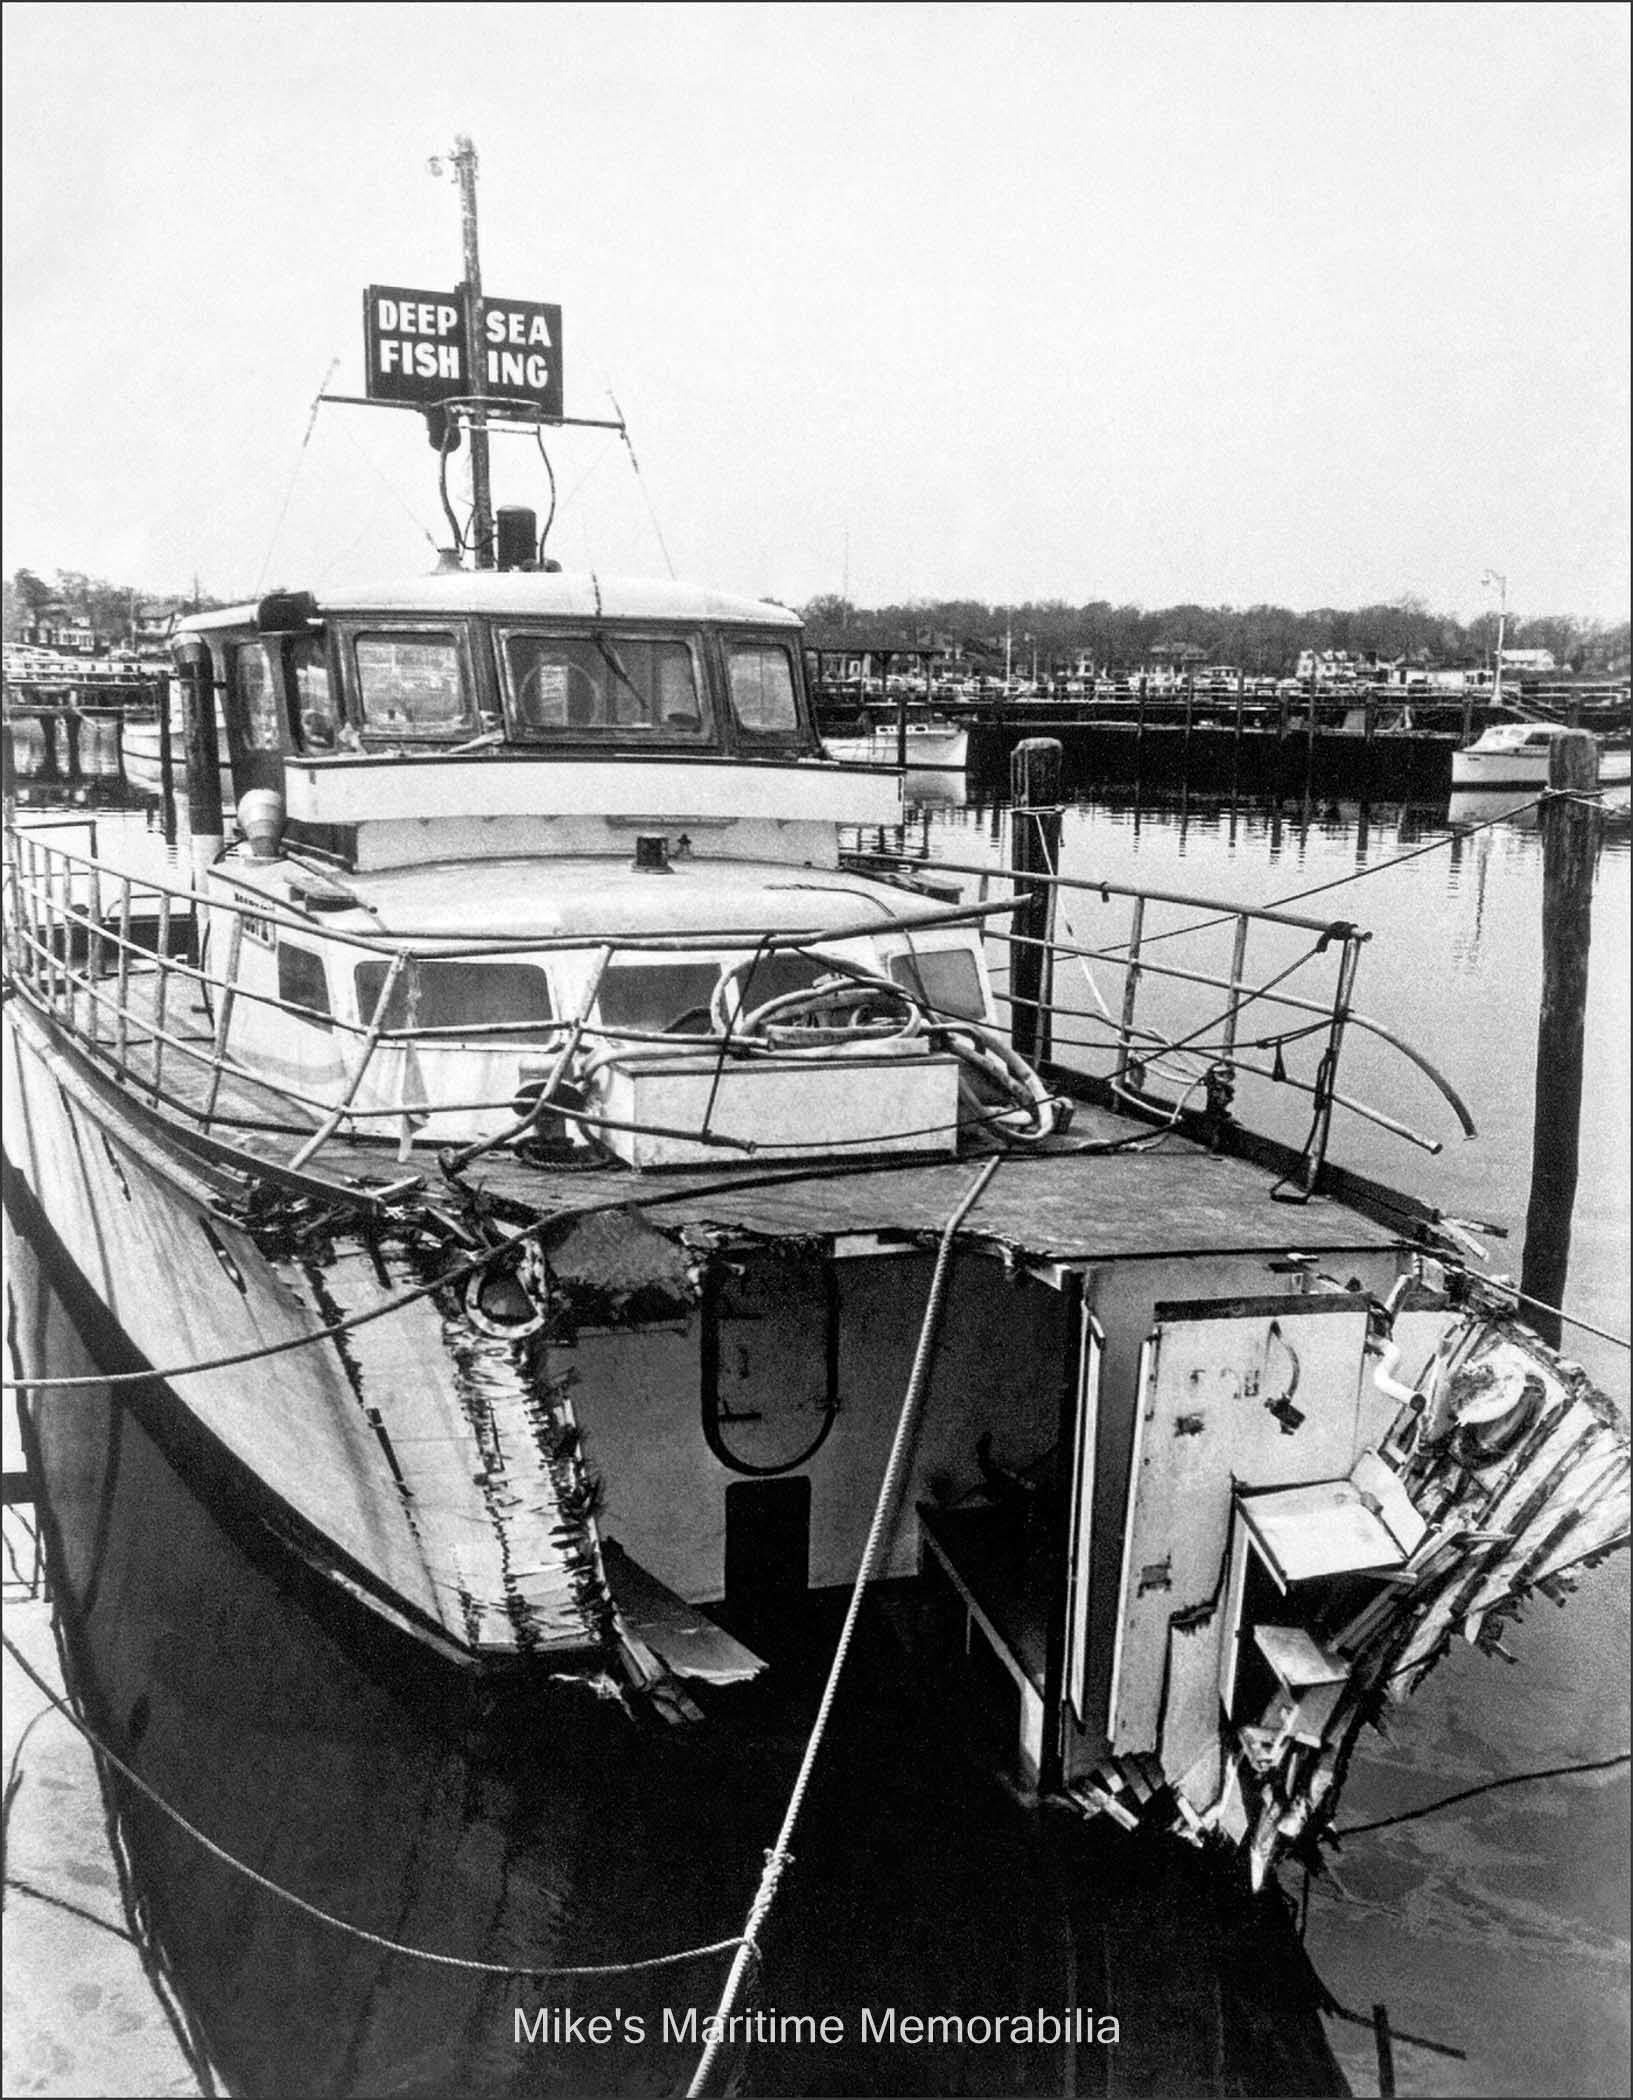 BOBBY II, Belmar, NJ – 1955 The "BOBBY II" back at her berth at Belmar, NJ after she was rammed by the 439-foot, 7,650-ton freighter, "PRESIDENT BUCHANAN" while fishing at the Cholera Banks on April 23, 1955. Thanks to her military construction, which included the now visible double forward crash bulkheads below deck, she fortunately did not sink and was even able to return to Belmar under her own power. Hundreds of people flocked to the Belmar Marine Basin to get a first-hand look at this amazing vessel.